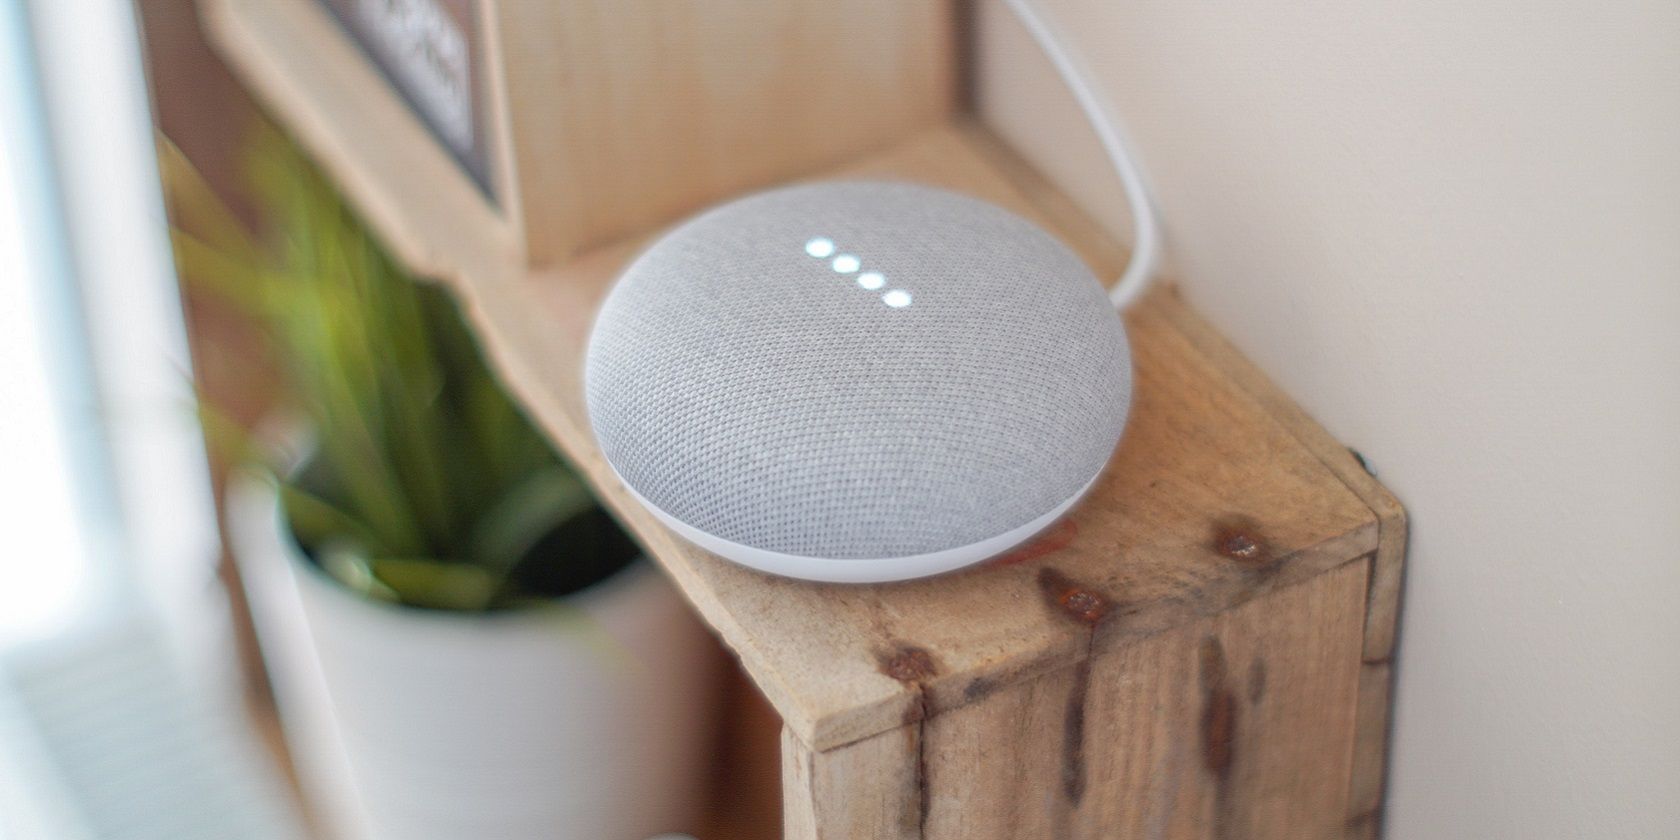 What Is a Google Nest Mini and Who Is It For?